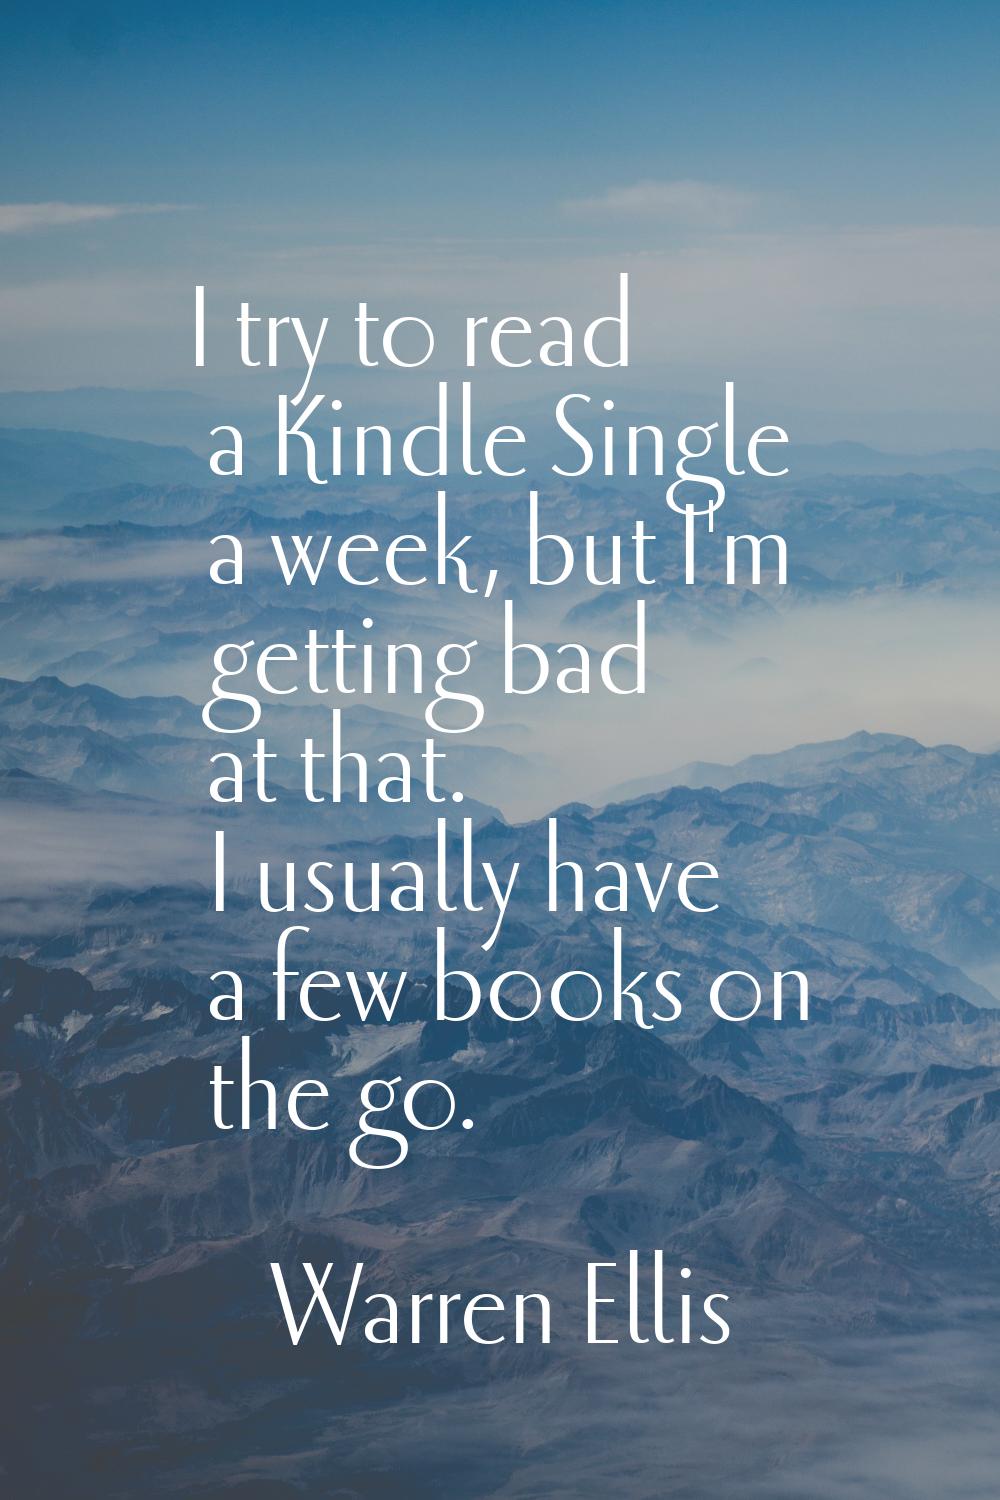 I try to read a Kindle Single a week, but I'm getting bad at that. I usually have a few books on th